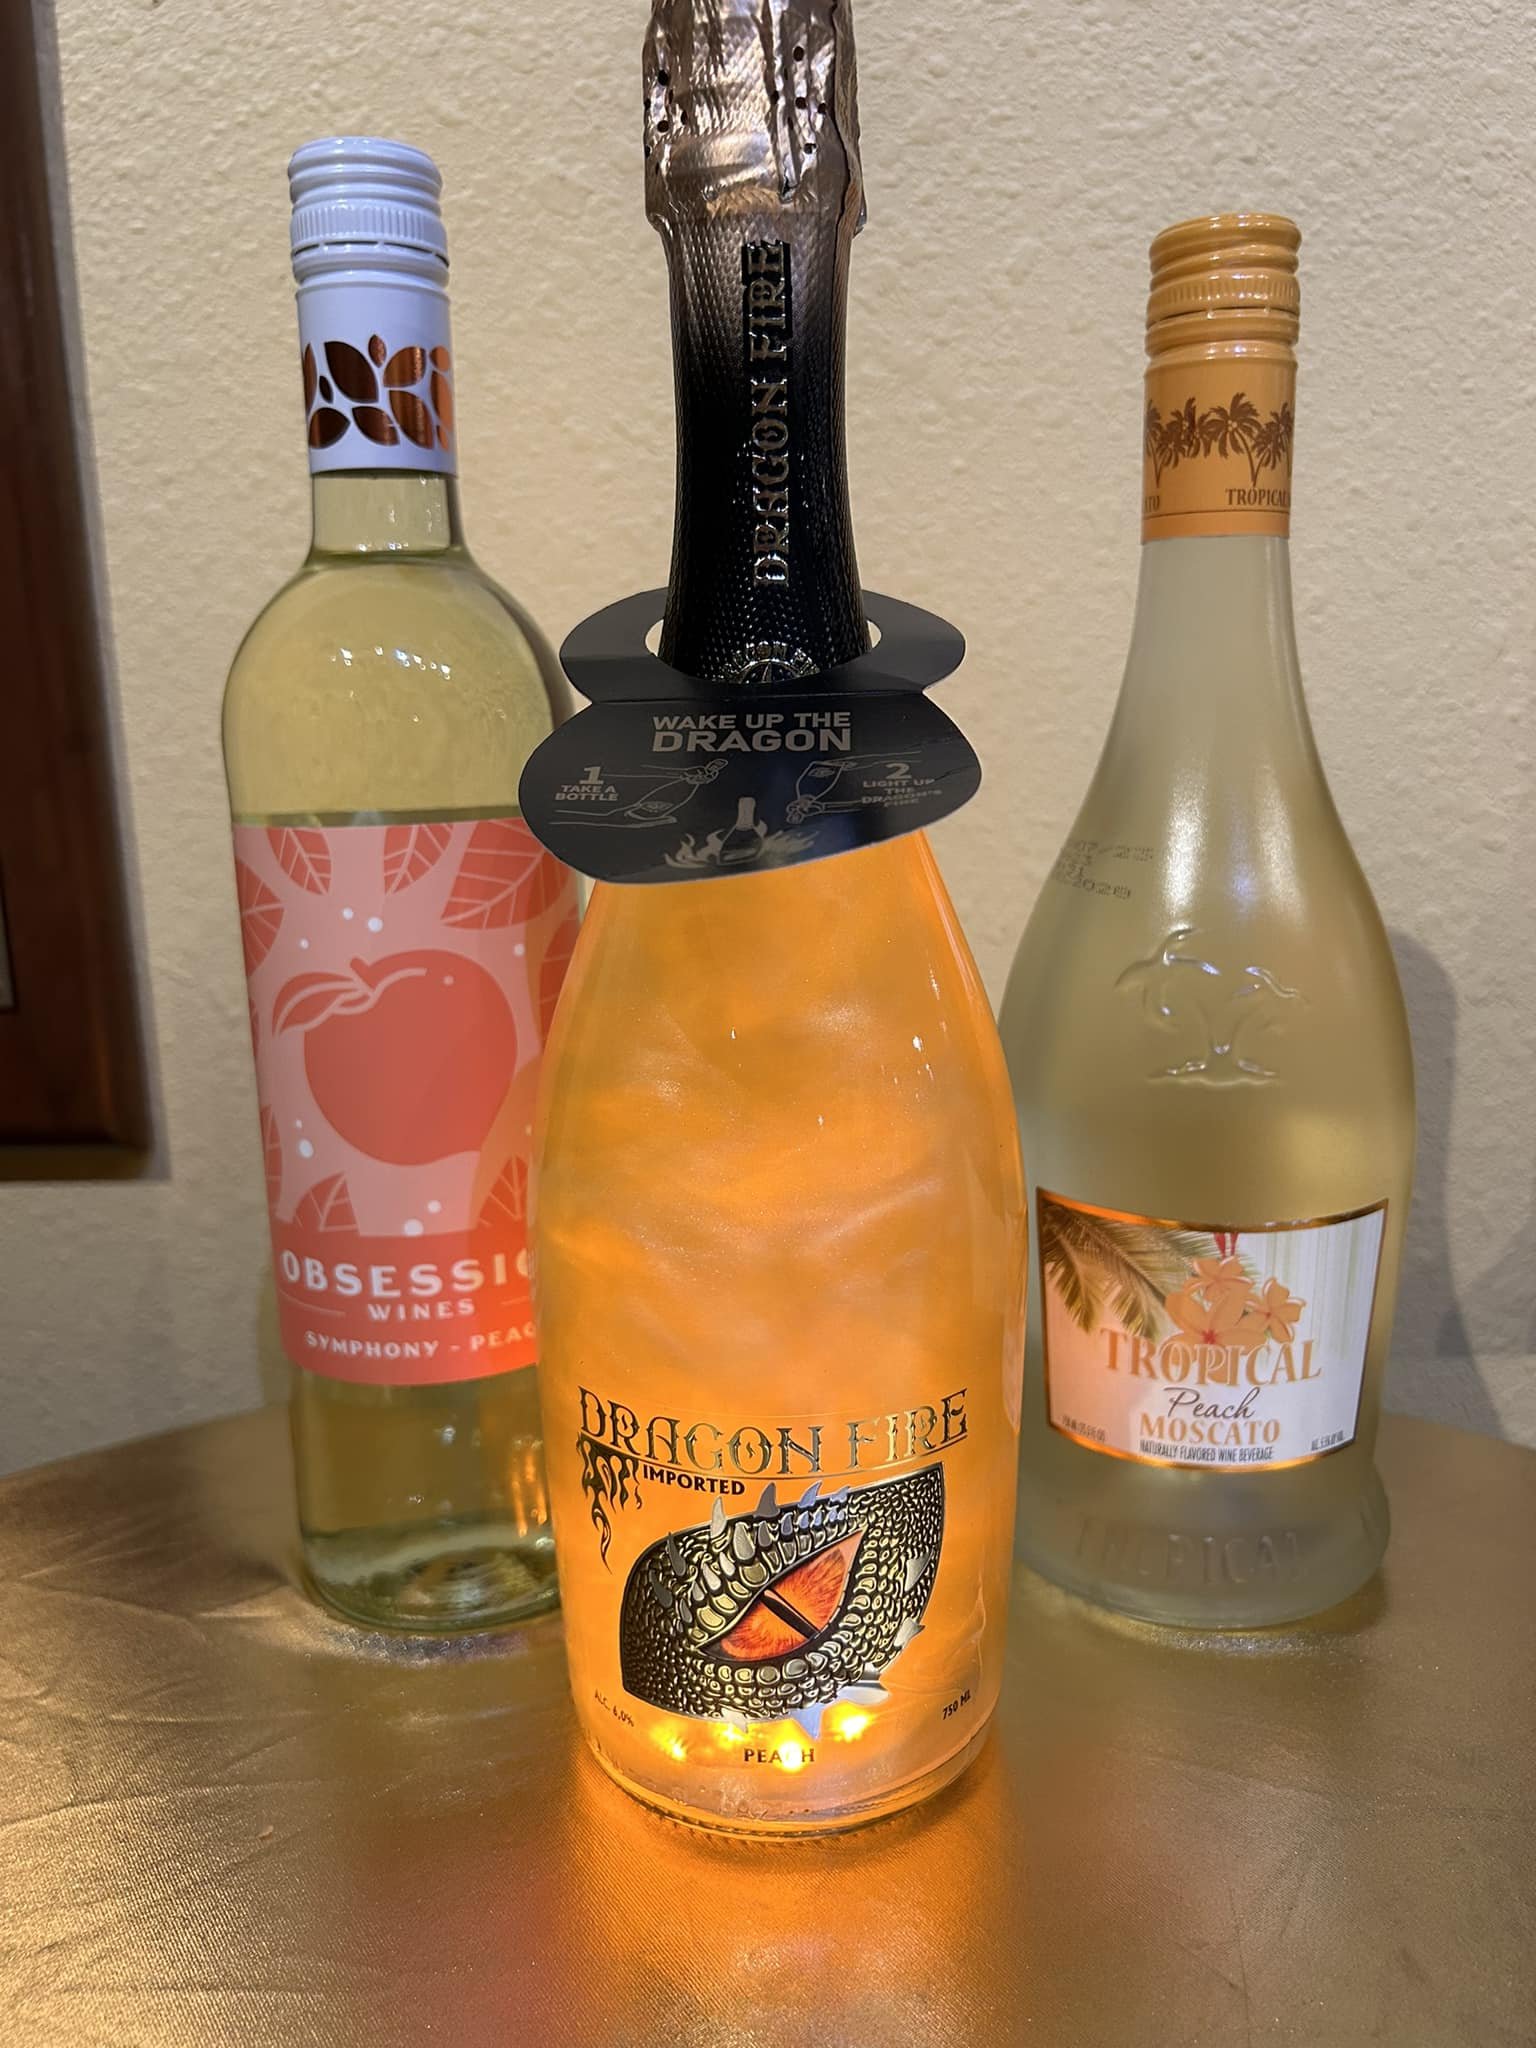 Take a look at this amazing donation of Peach wine from The Resort At Fredericksburg. 🍷 Yes, it lights up! 🔥 
Make sure to get your raffle tickets for our 'Giant Peach' basket, either online or by contacting us directly. 🍑 
https://givebutter.com/